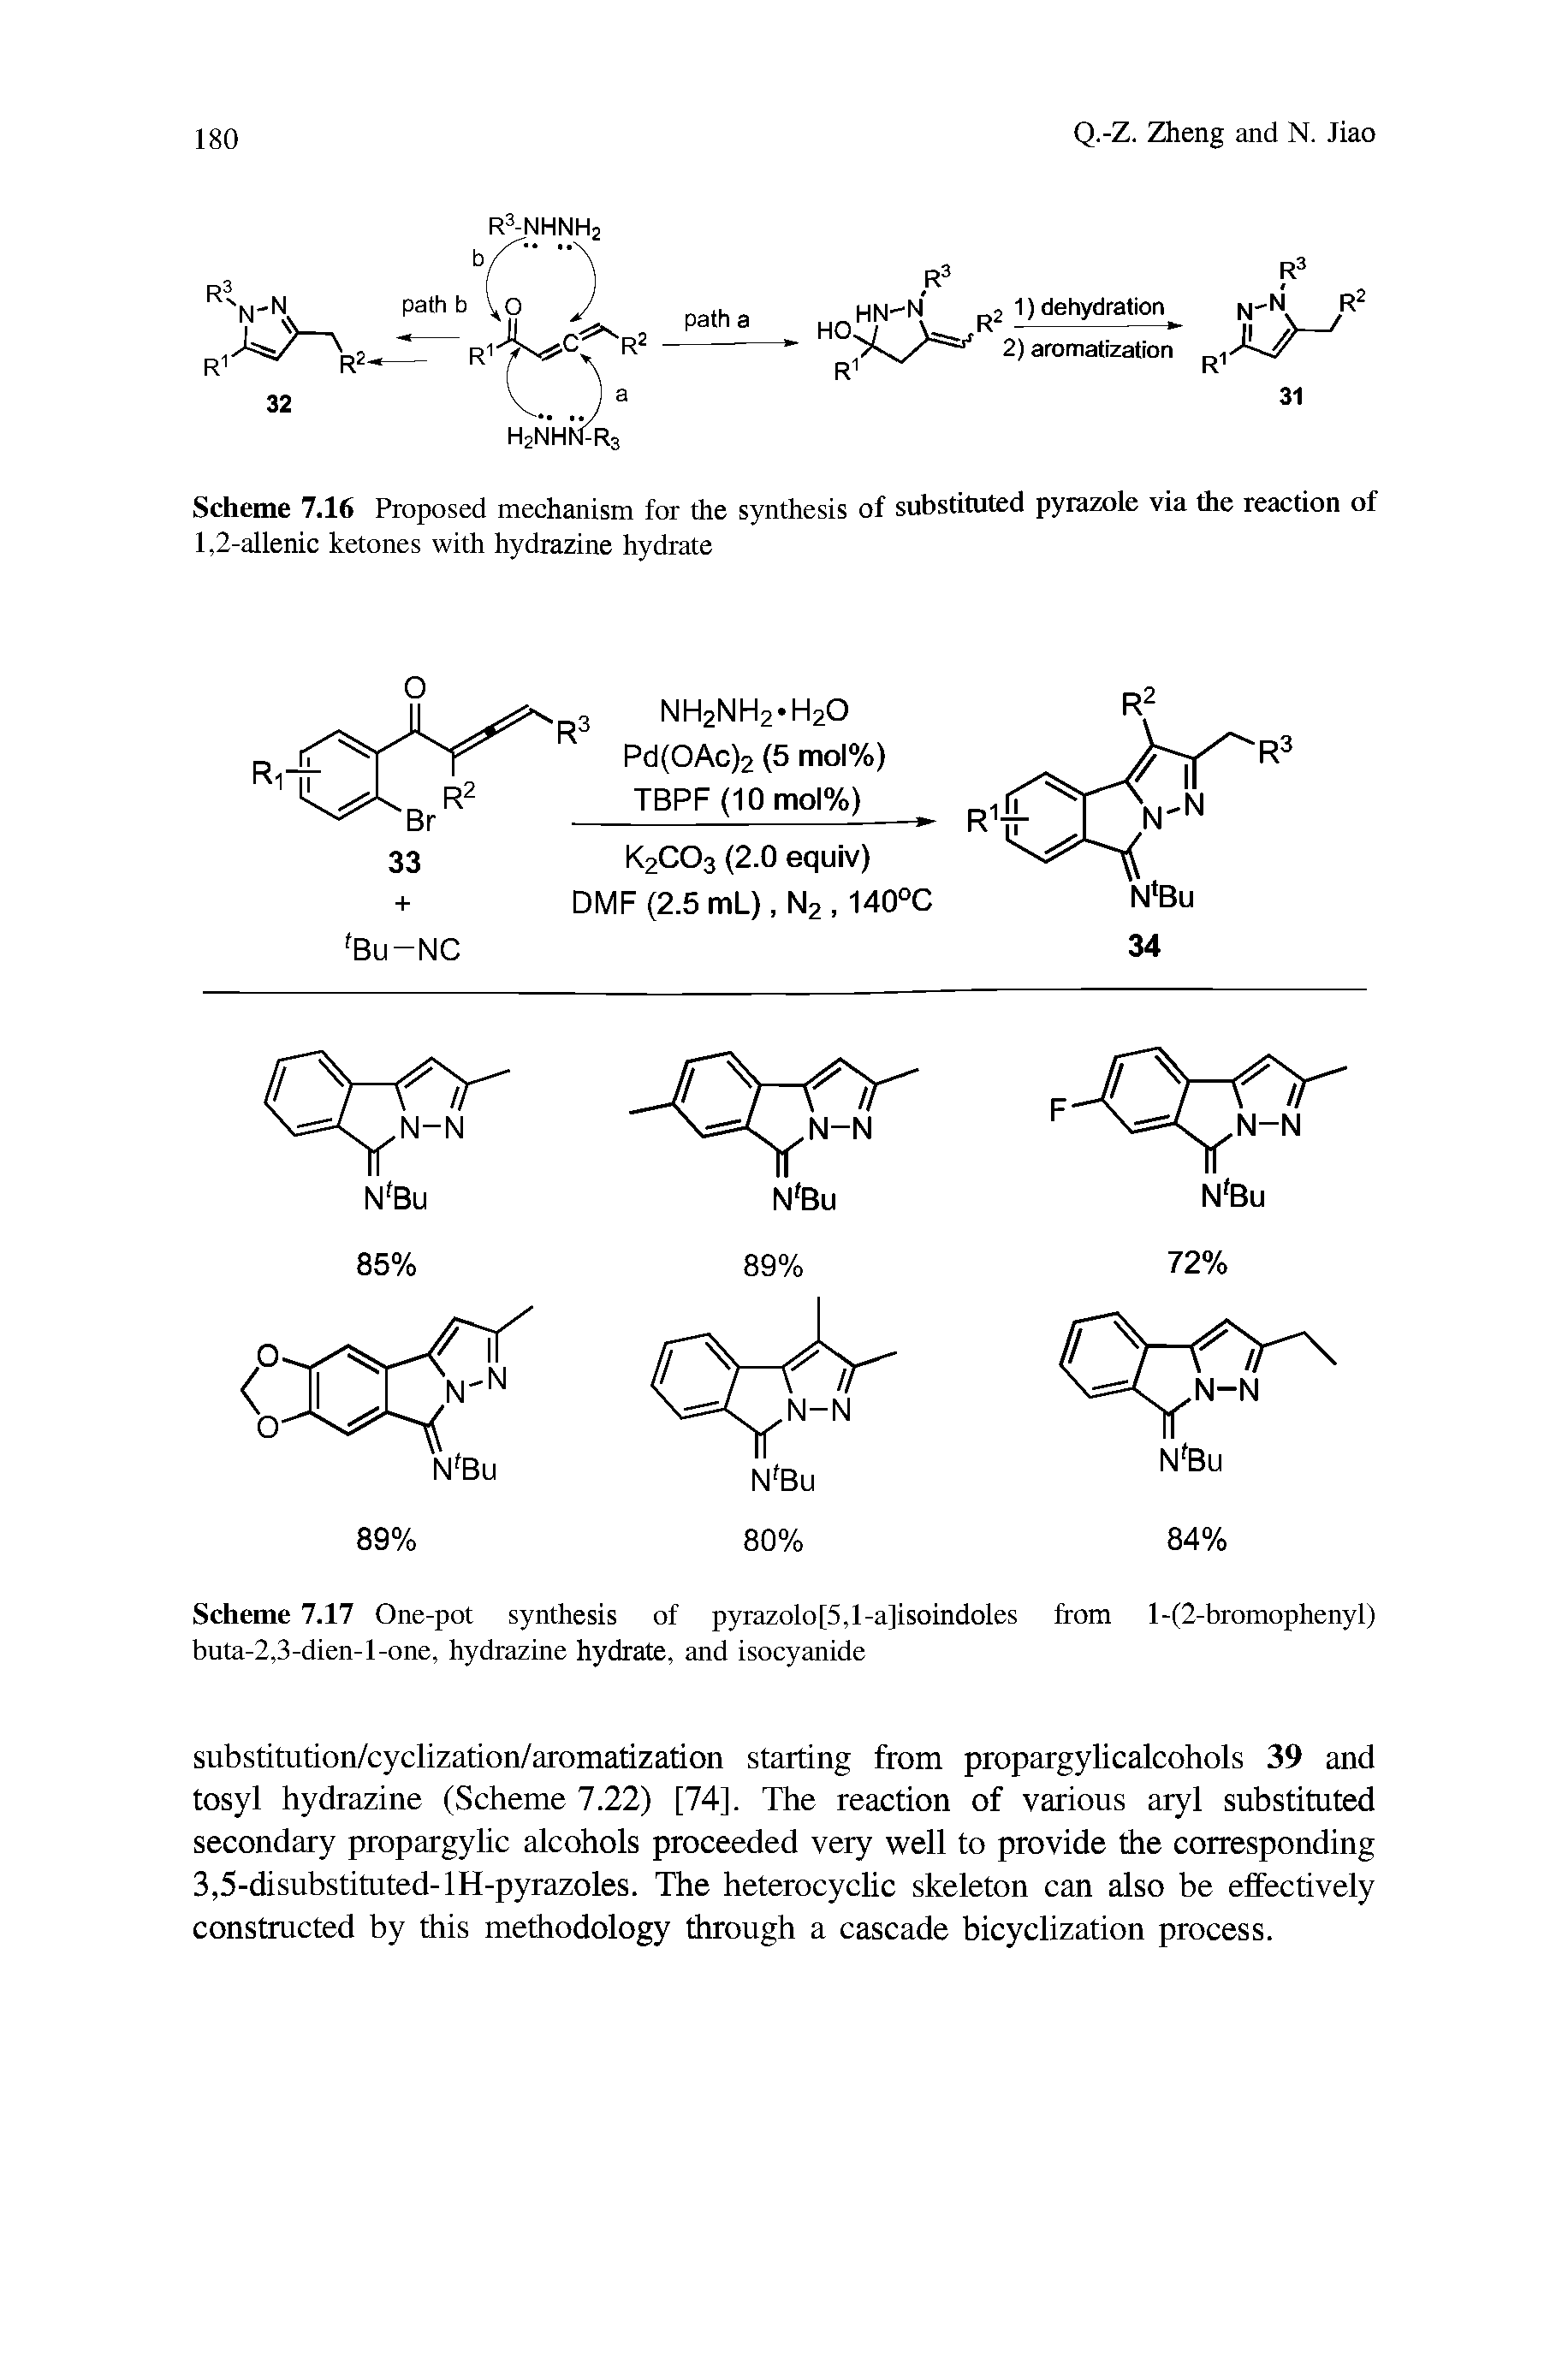 Scheme 7.17 One-pot synthesis of pyrazolo[5,l-a]isoindoles from l-(2-bromophenyl) buta-2,3-dien-l-one, hydrazine hydrate, and isocyanide...